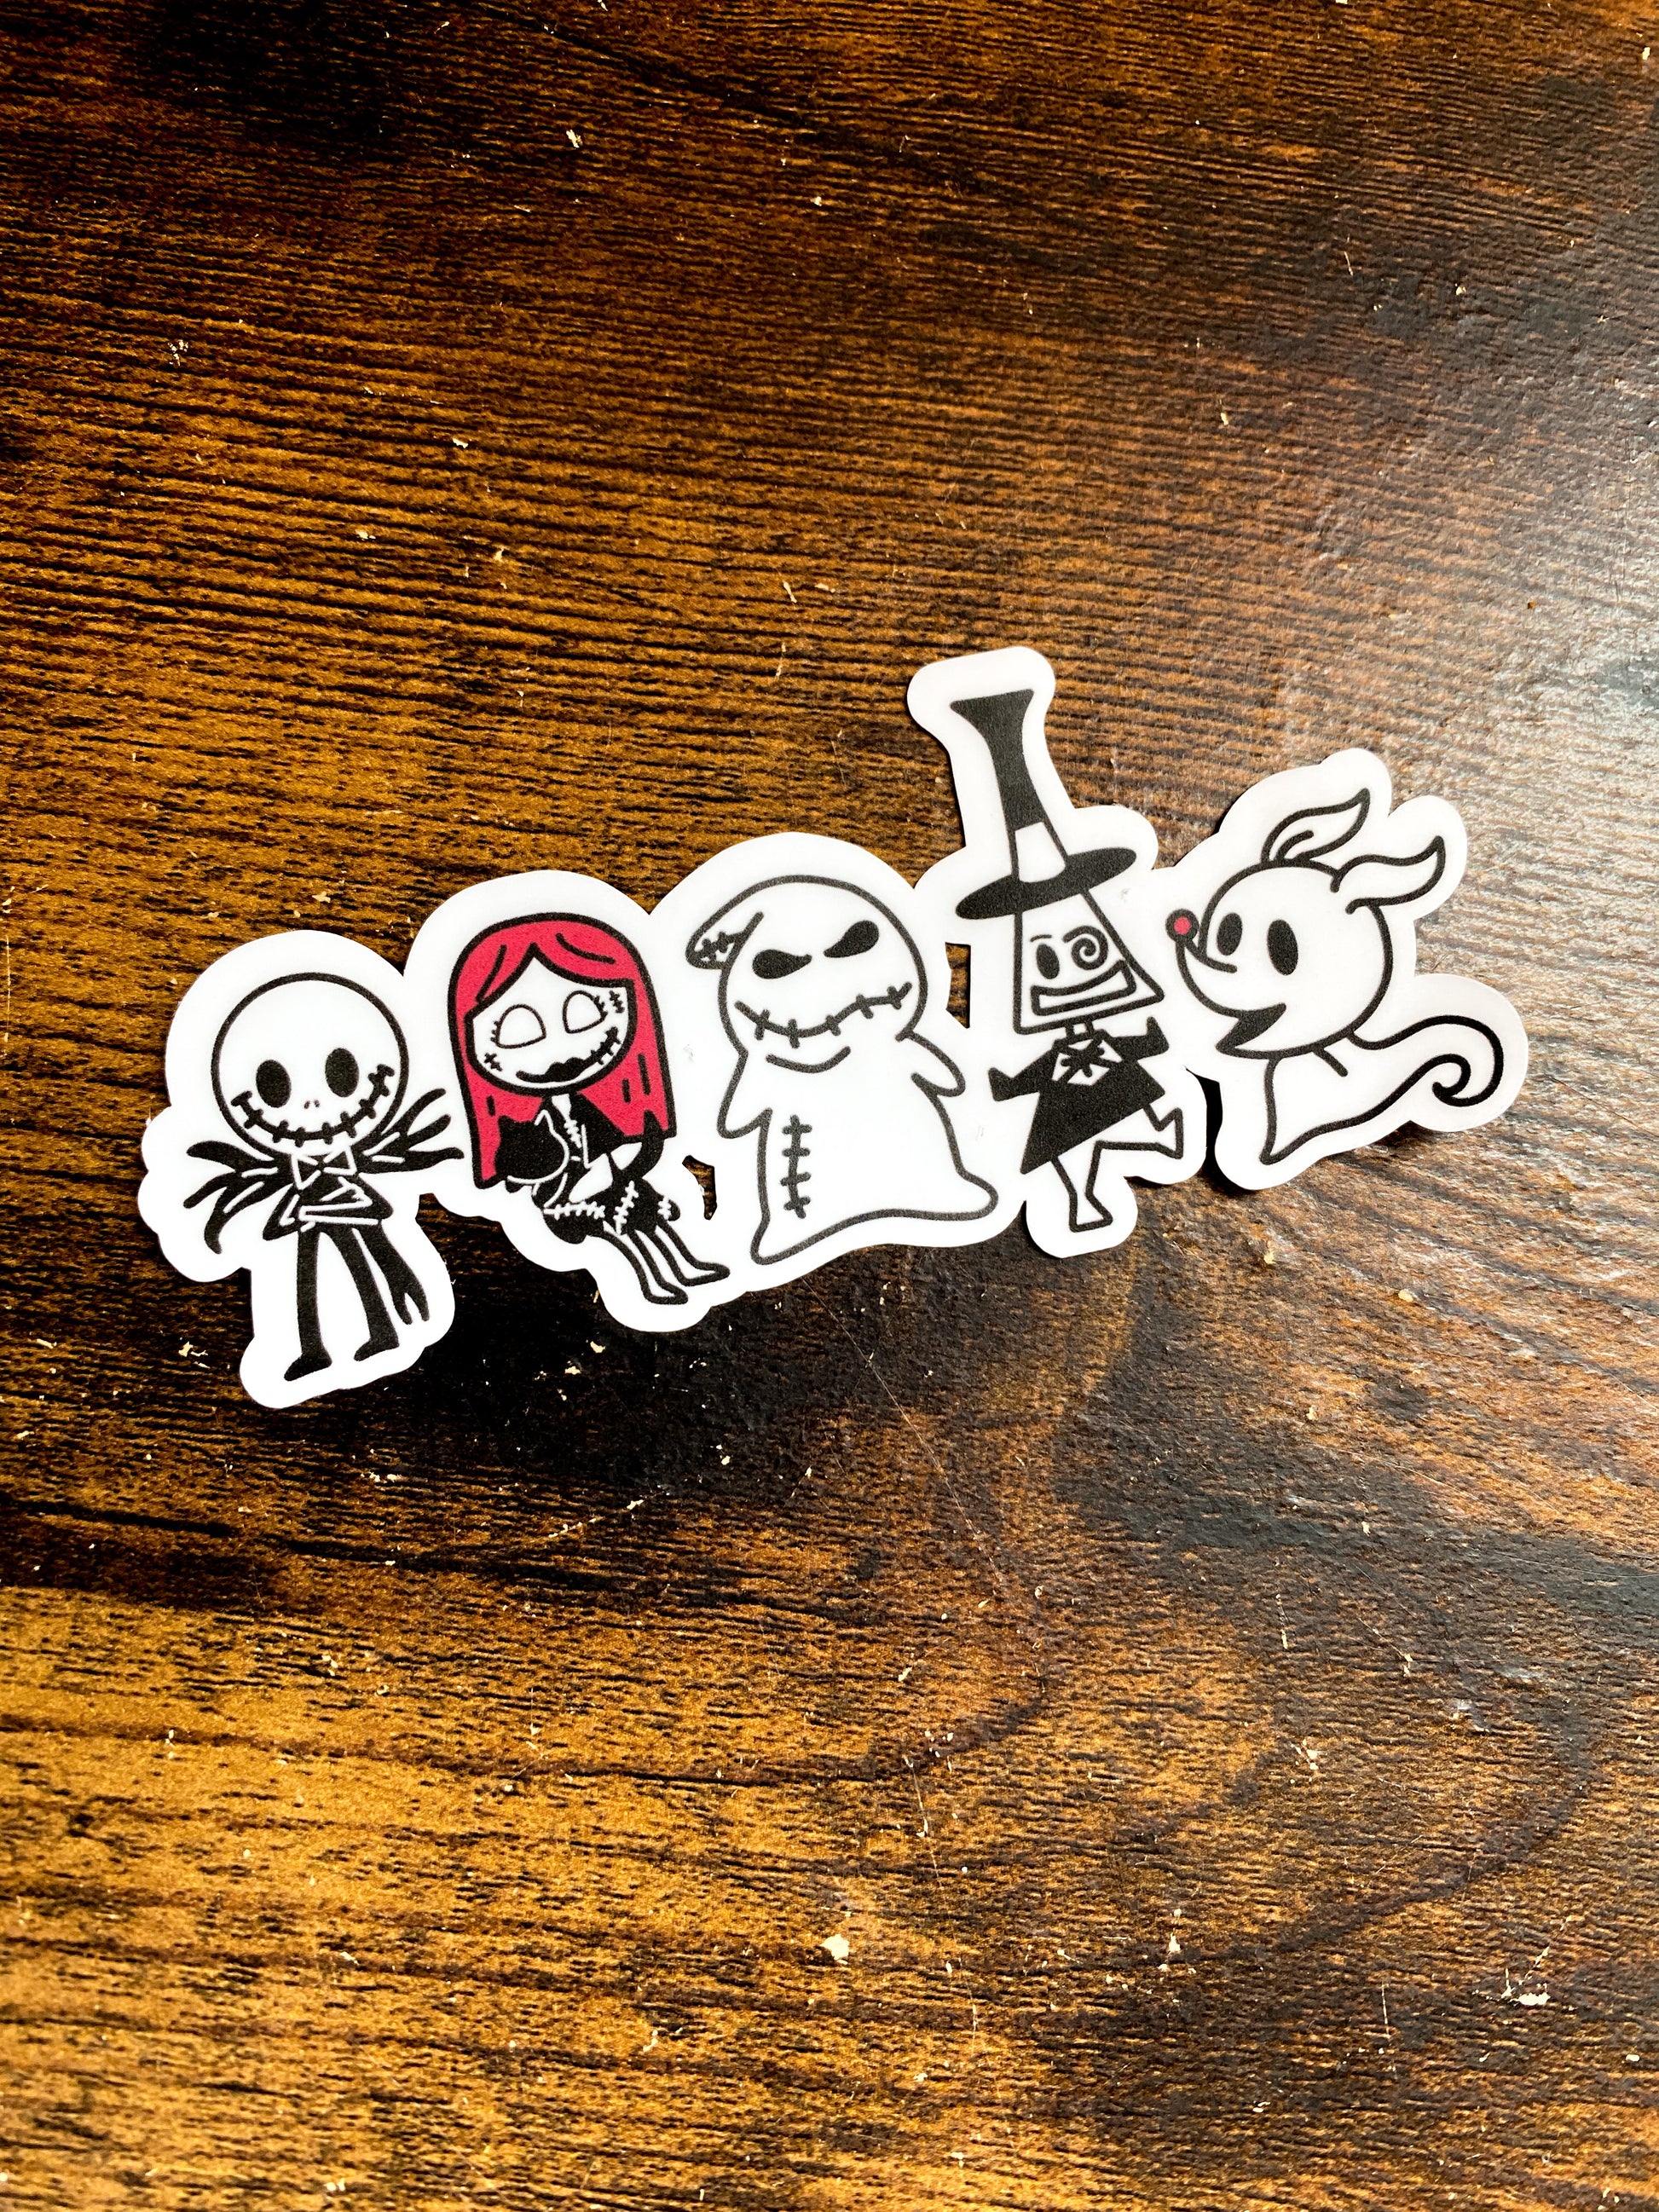 Single Nightmare Before Christmas Sticker. Black, white and red.